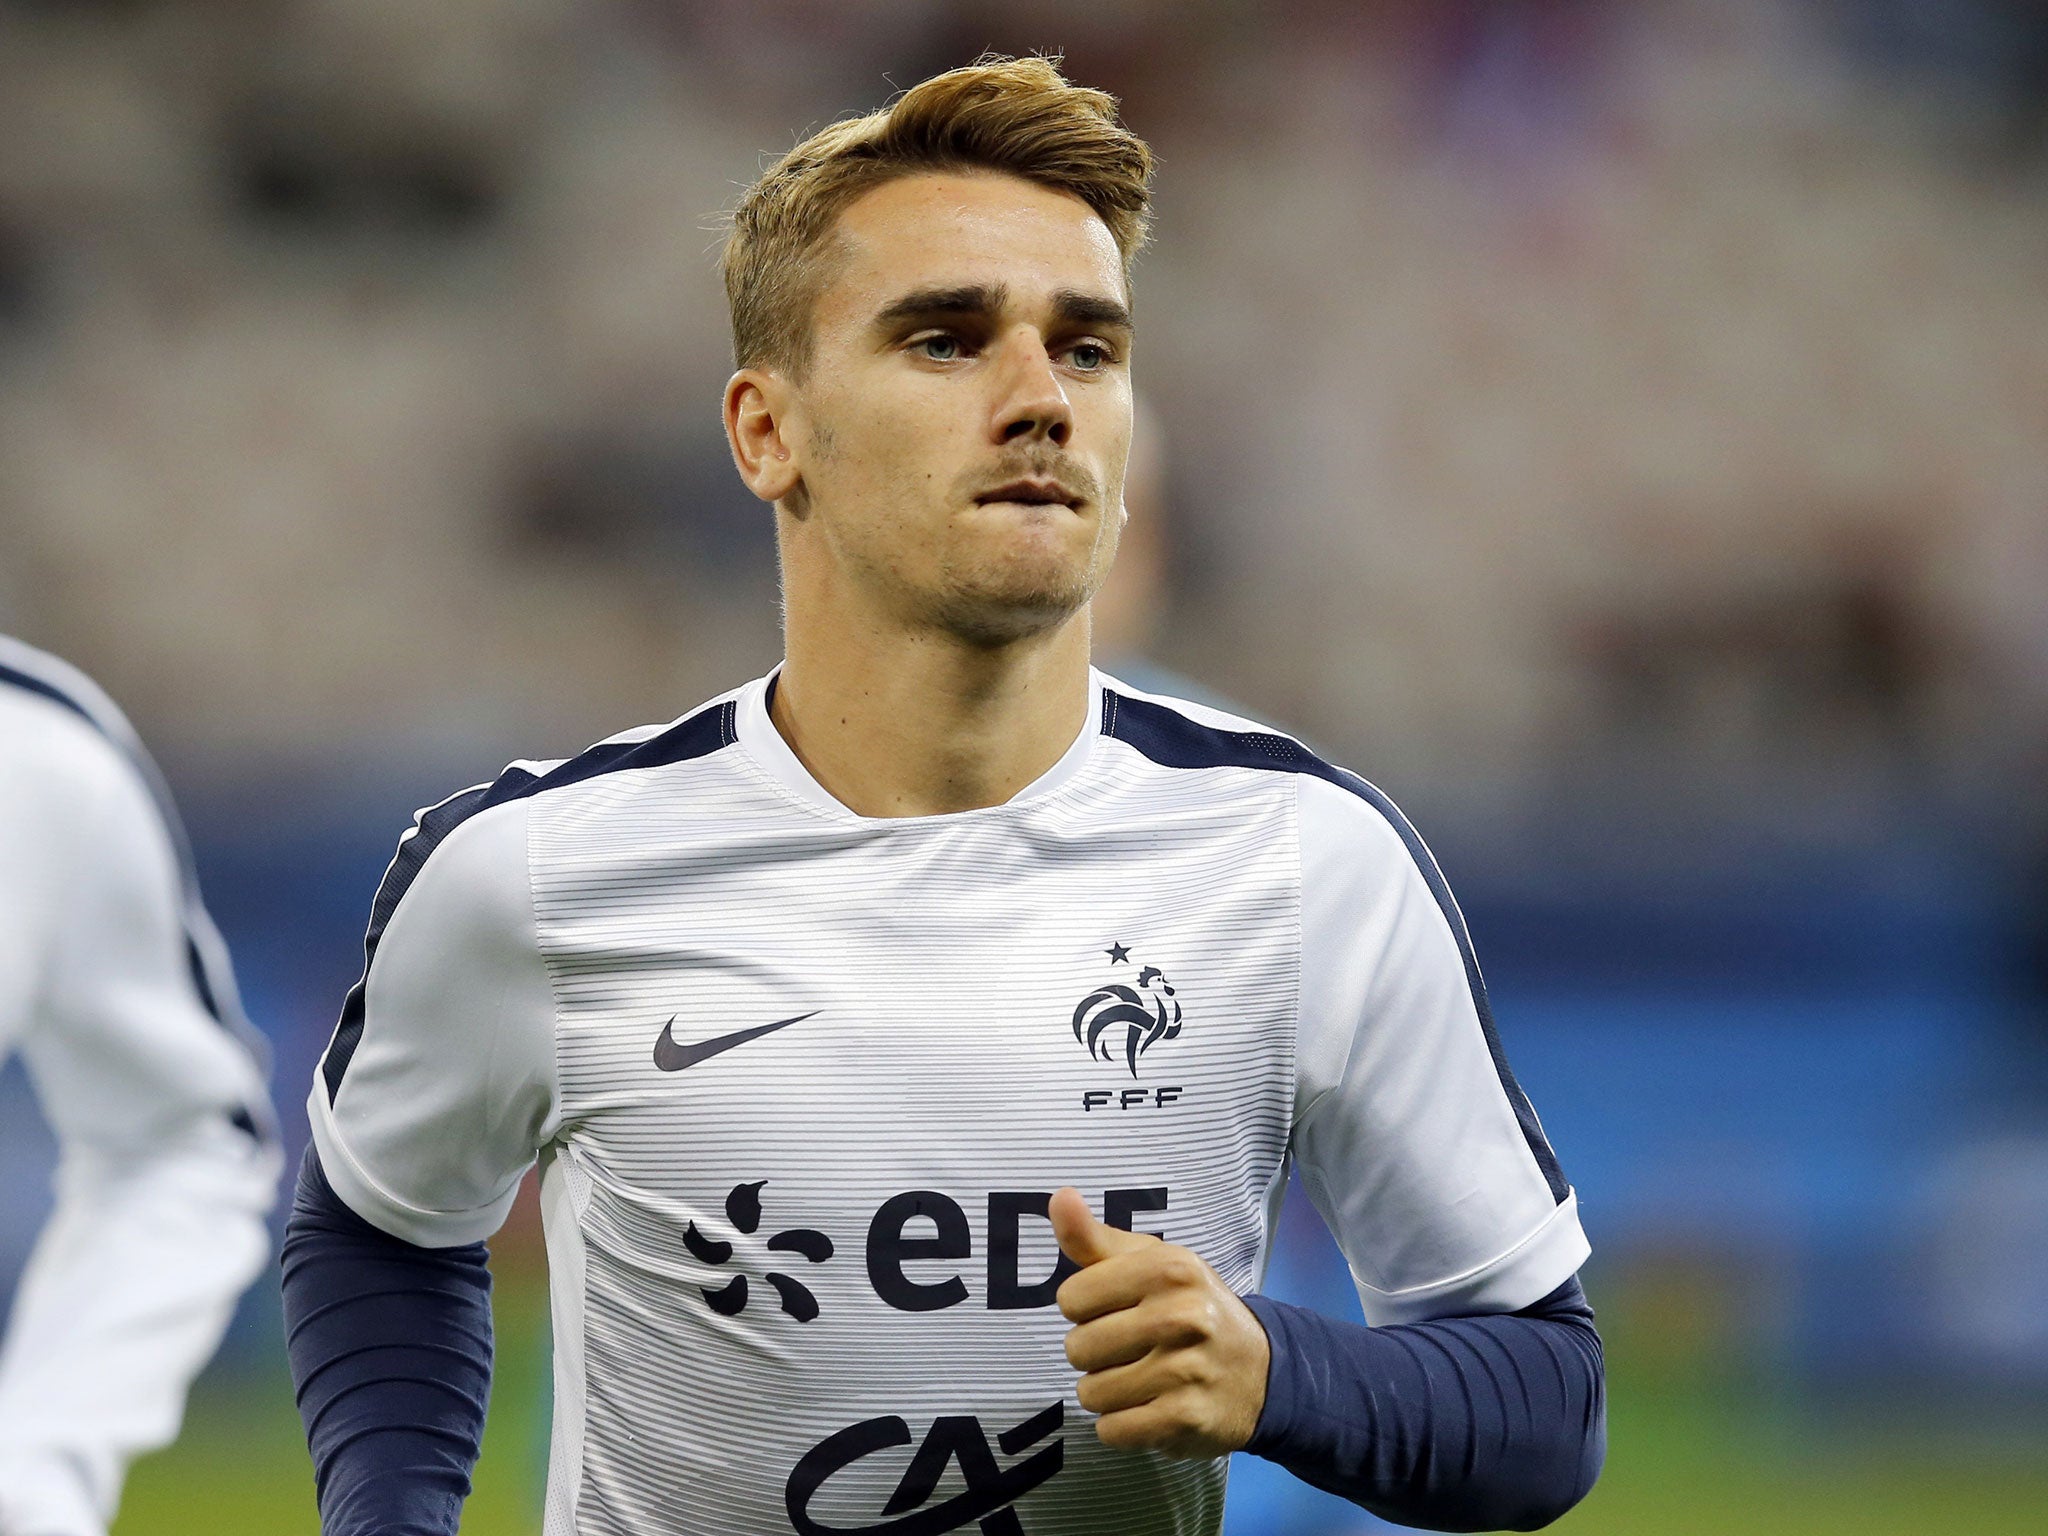 Antoine Griezmann revealed that his sister was involved in the Bataclan siege in Paris